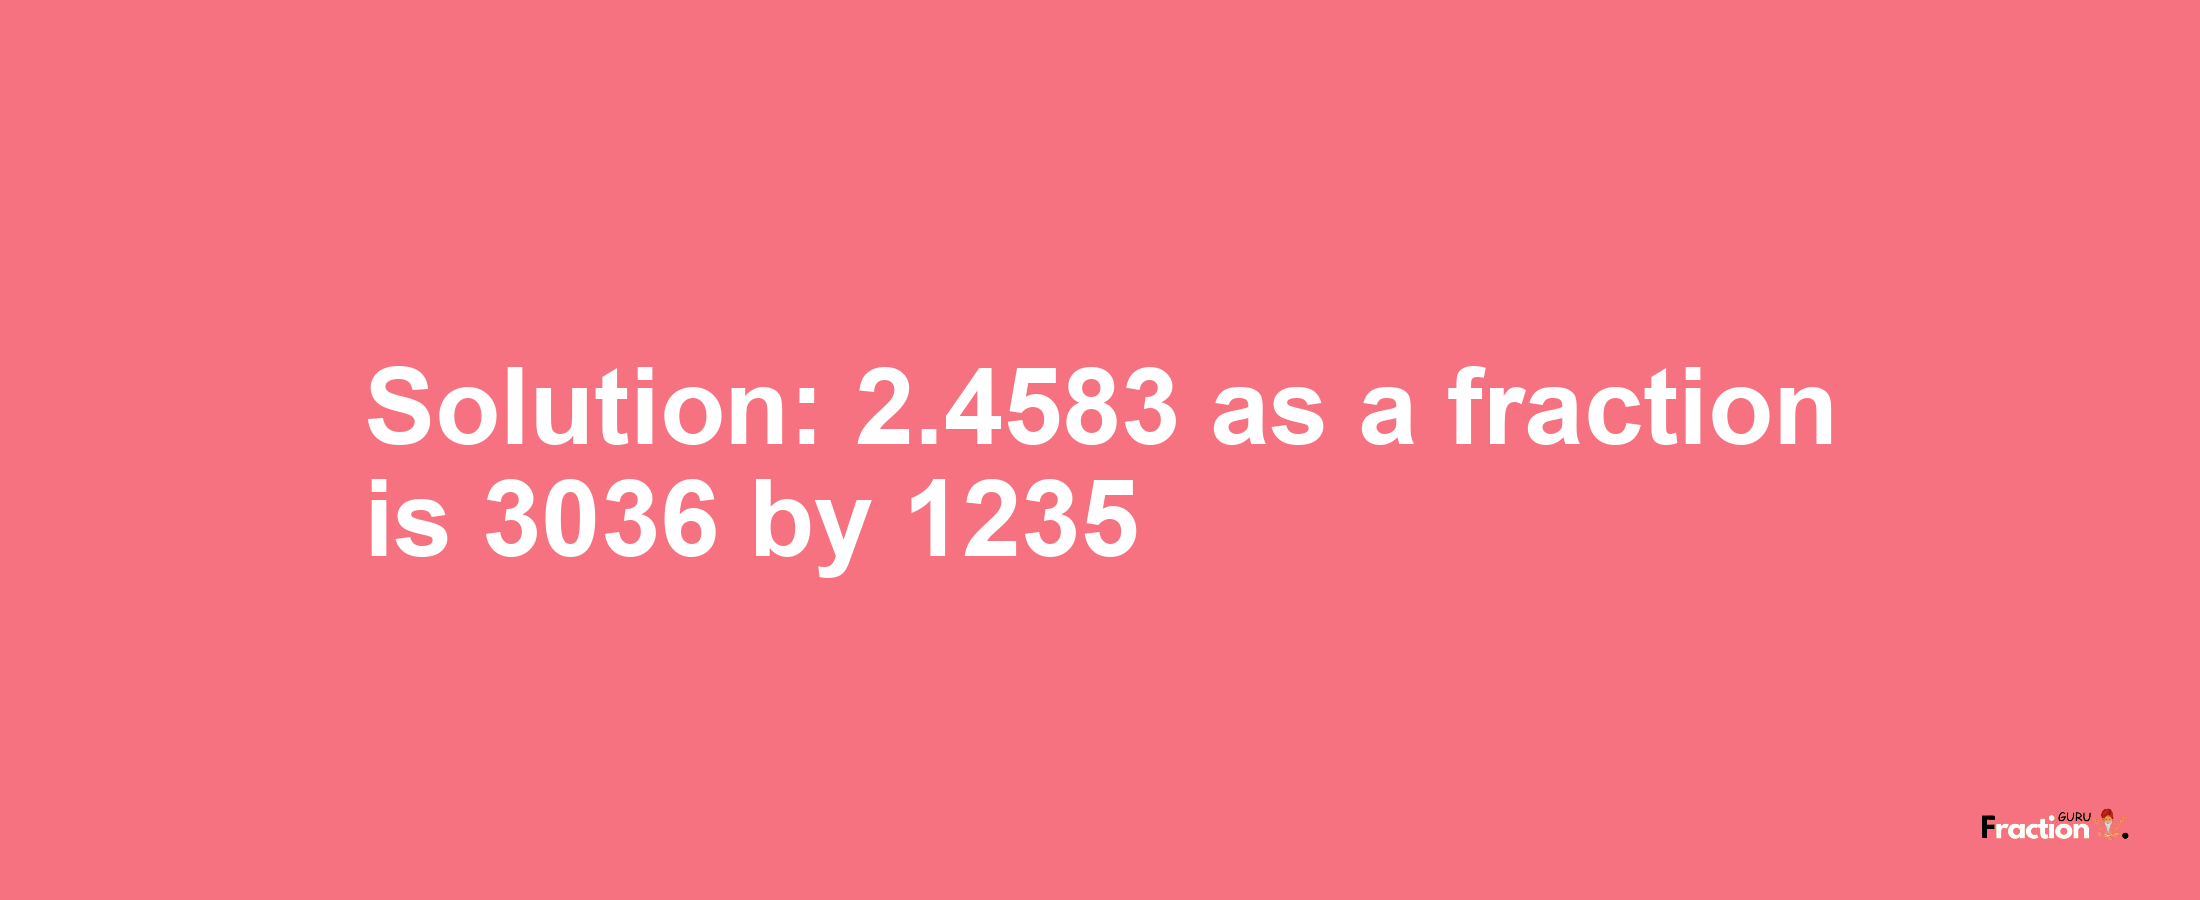 Solution:2.4583 as a fraction is 3036/1235